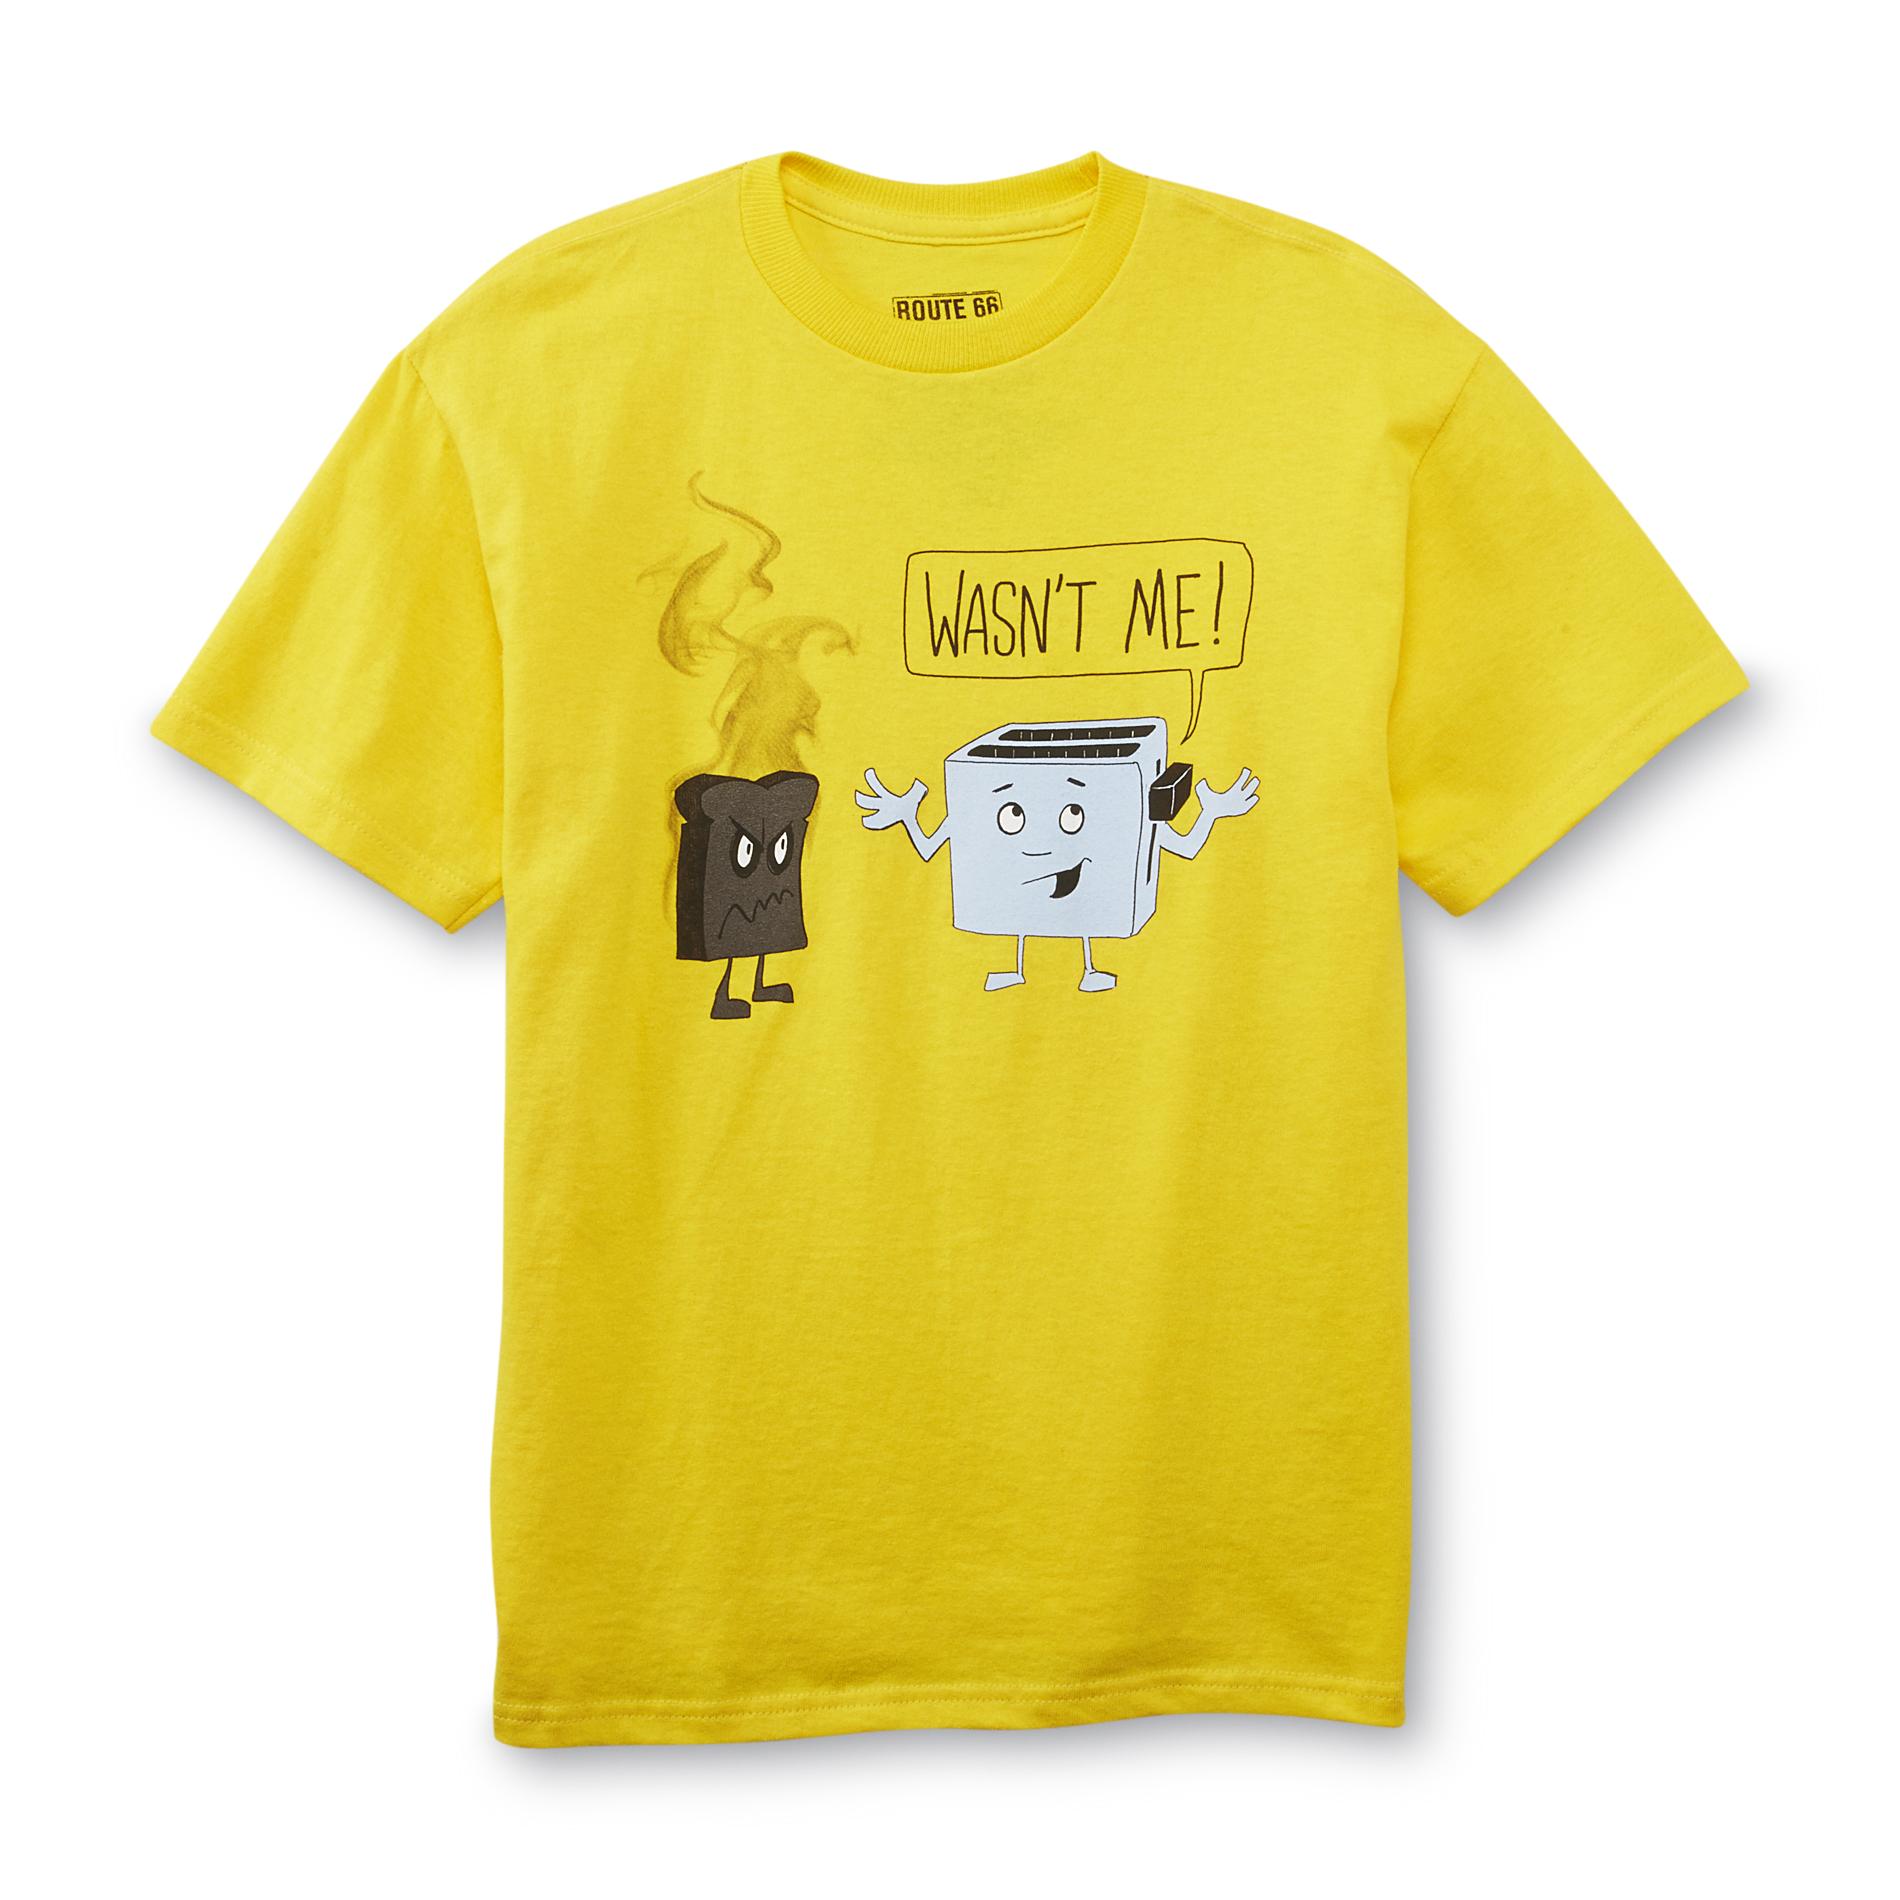 Route 66 Boy's Graphic T-Shirt - Toaster